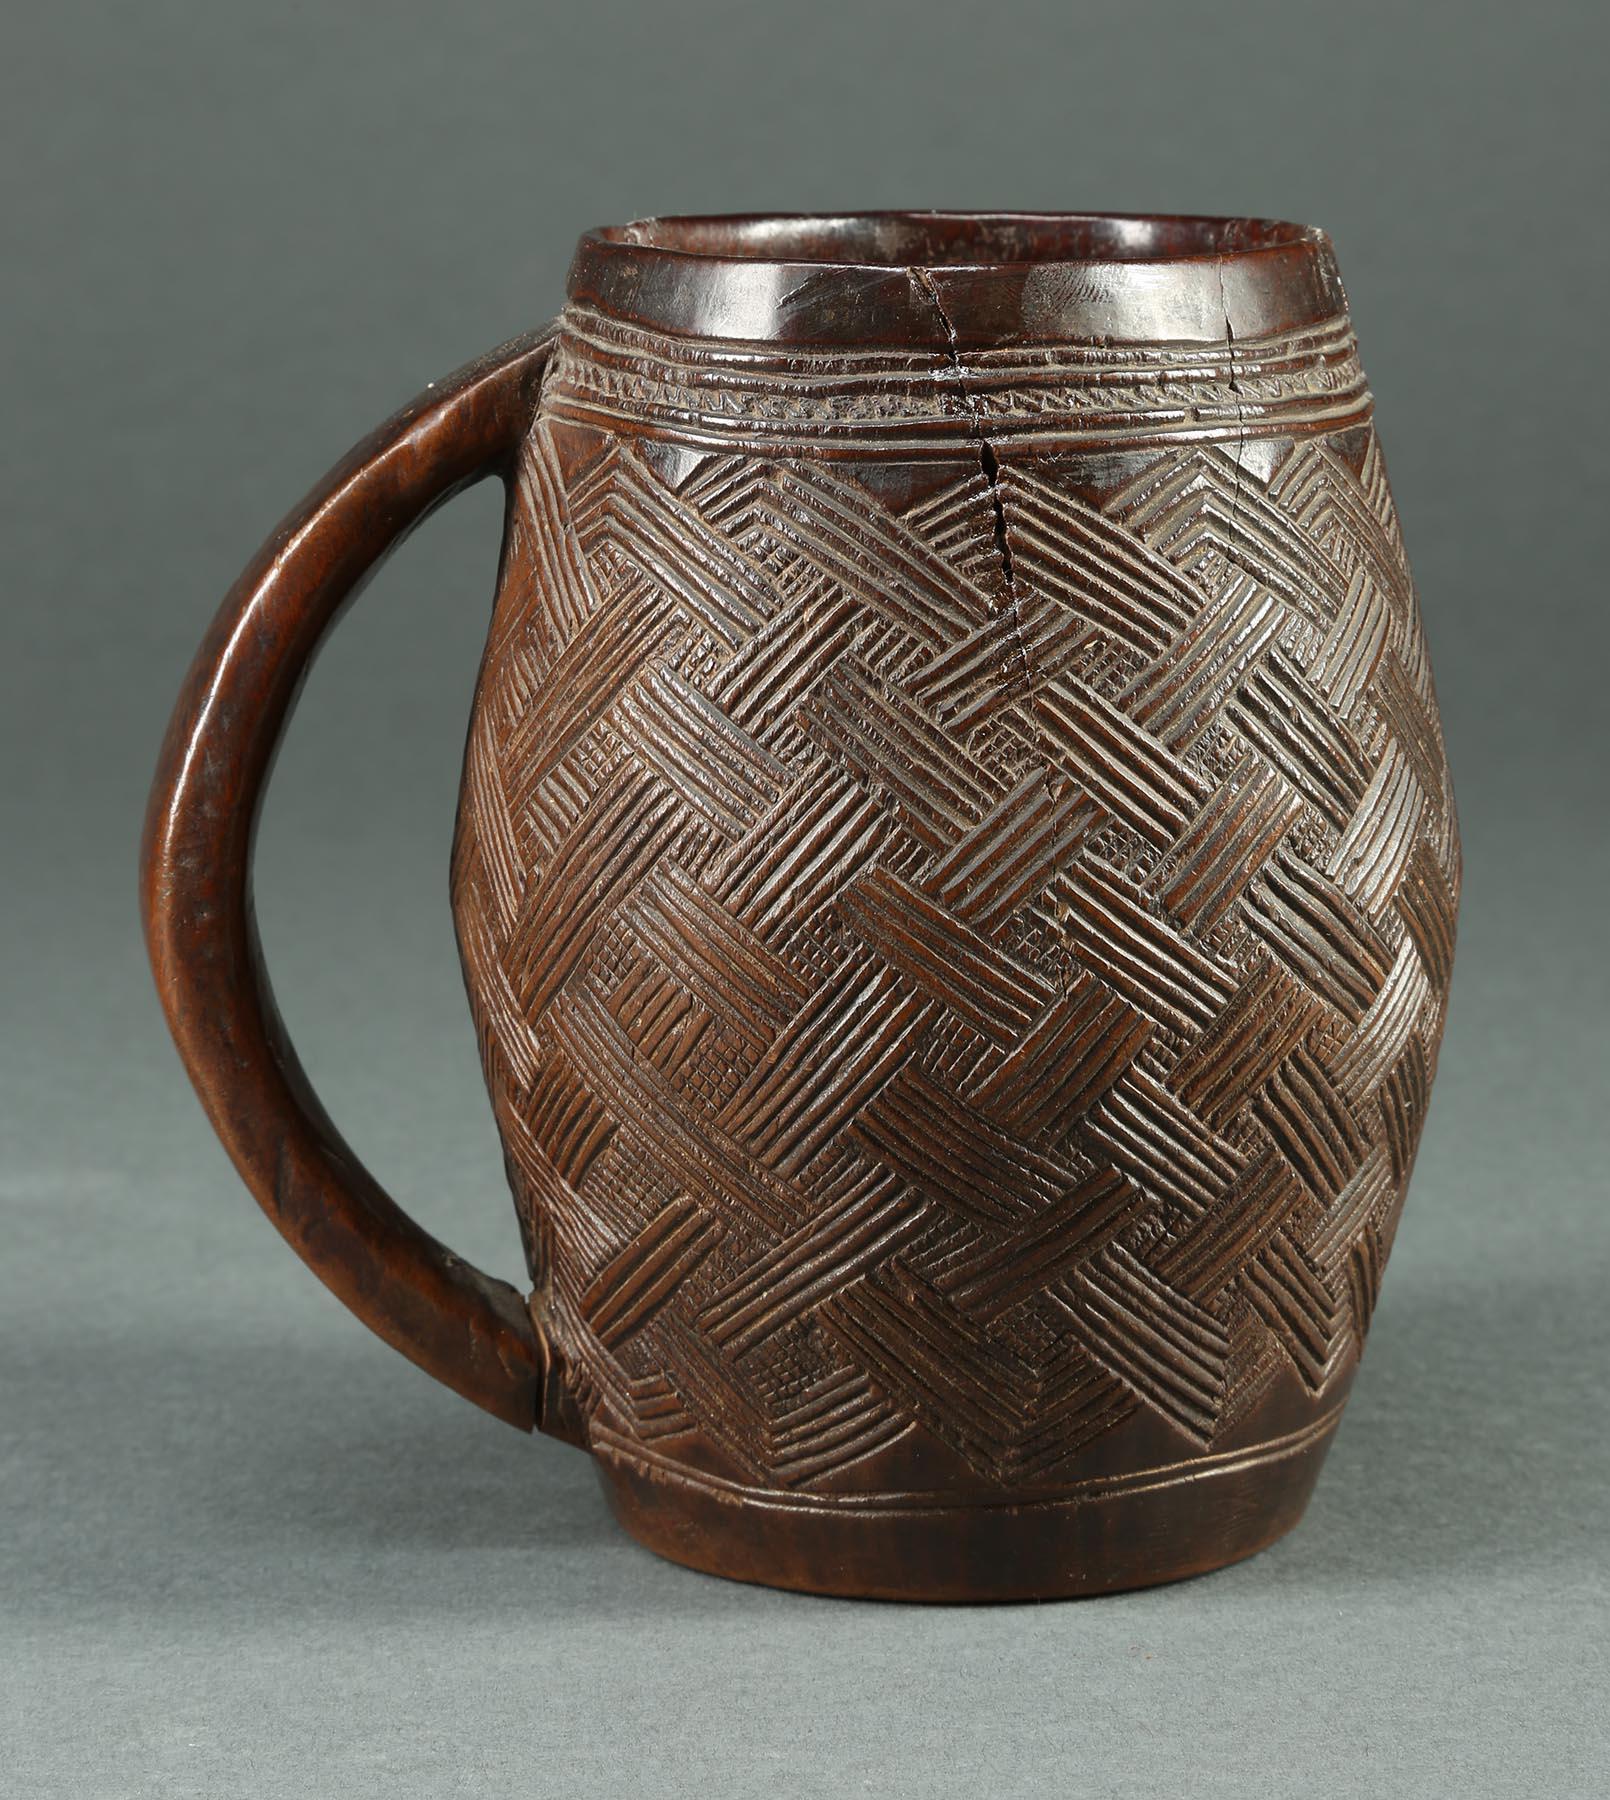 Tribal Early 20th Century Finely Carved Wood Kuba Cup with Geometric Designs, Africa